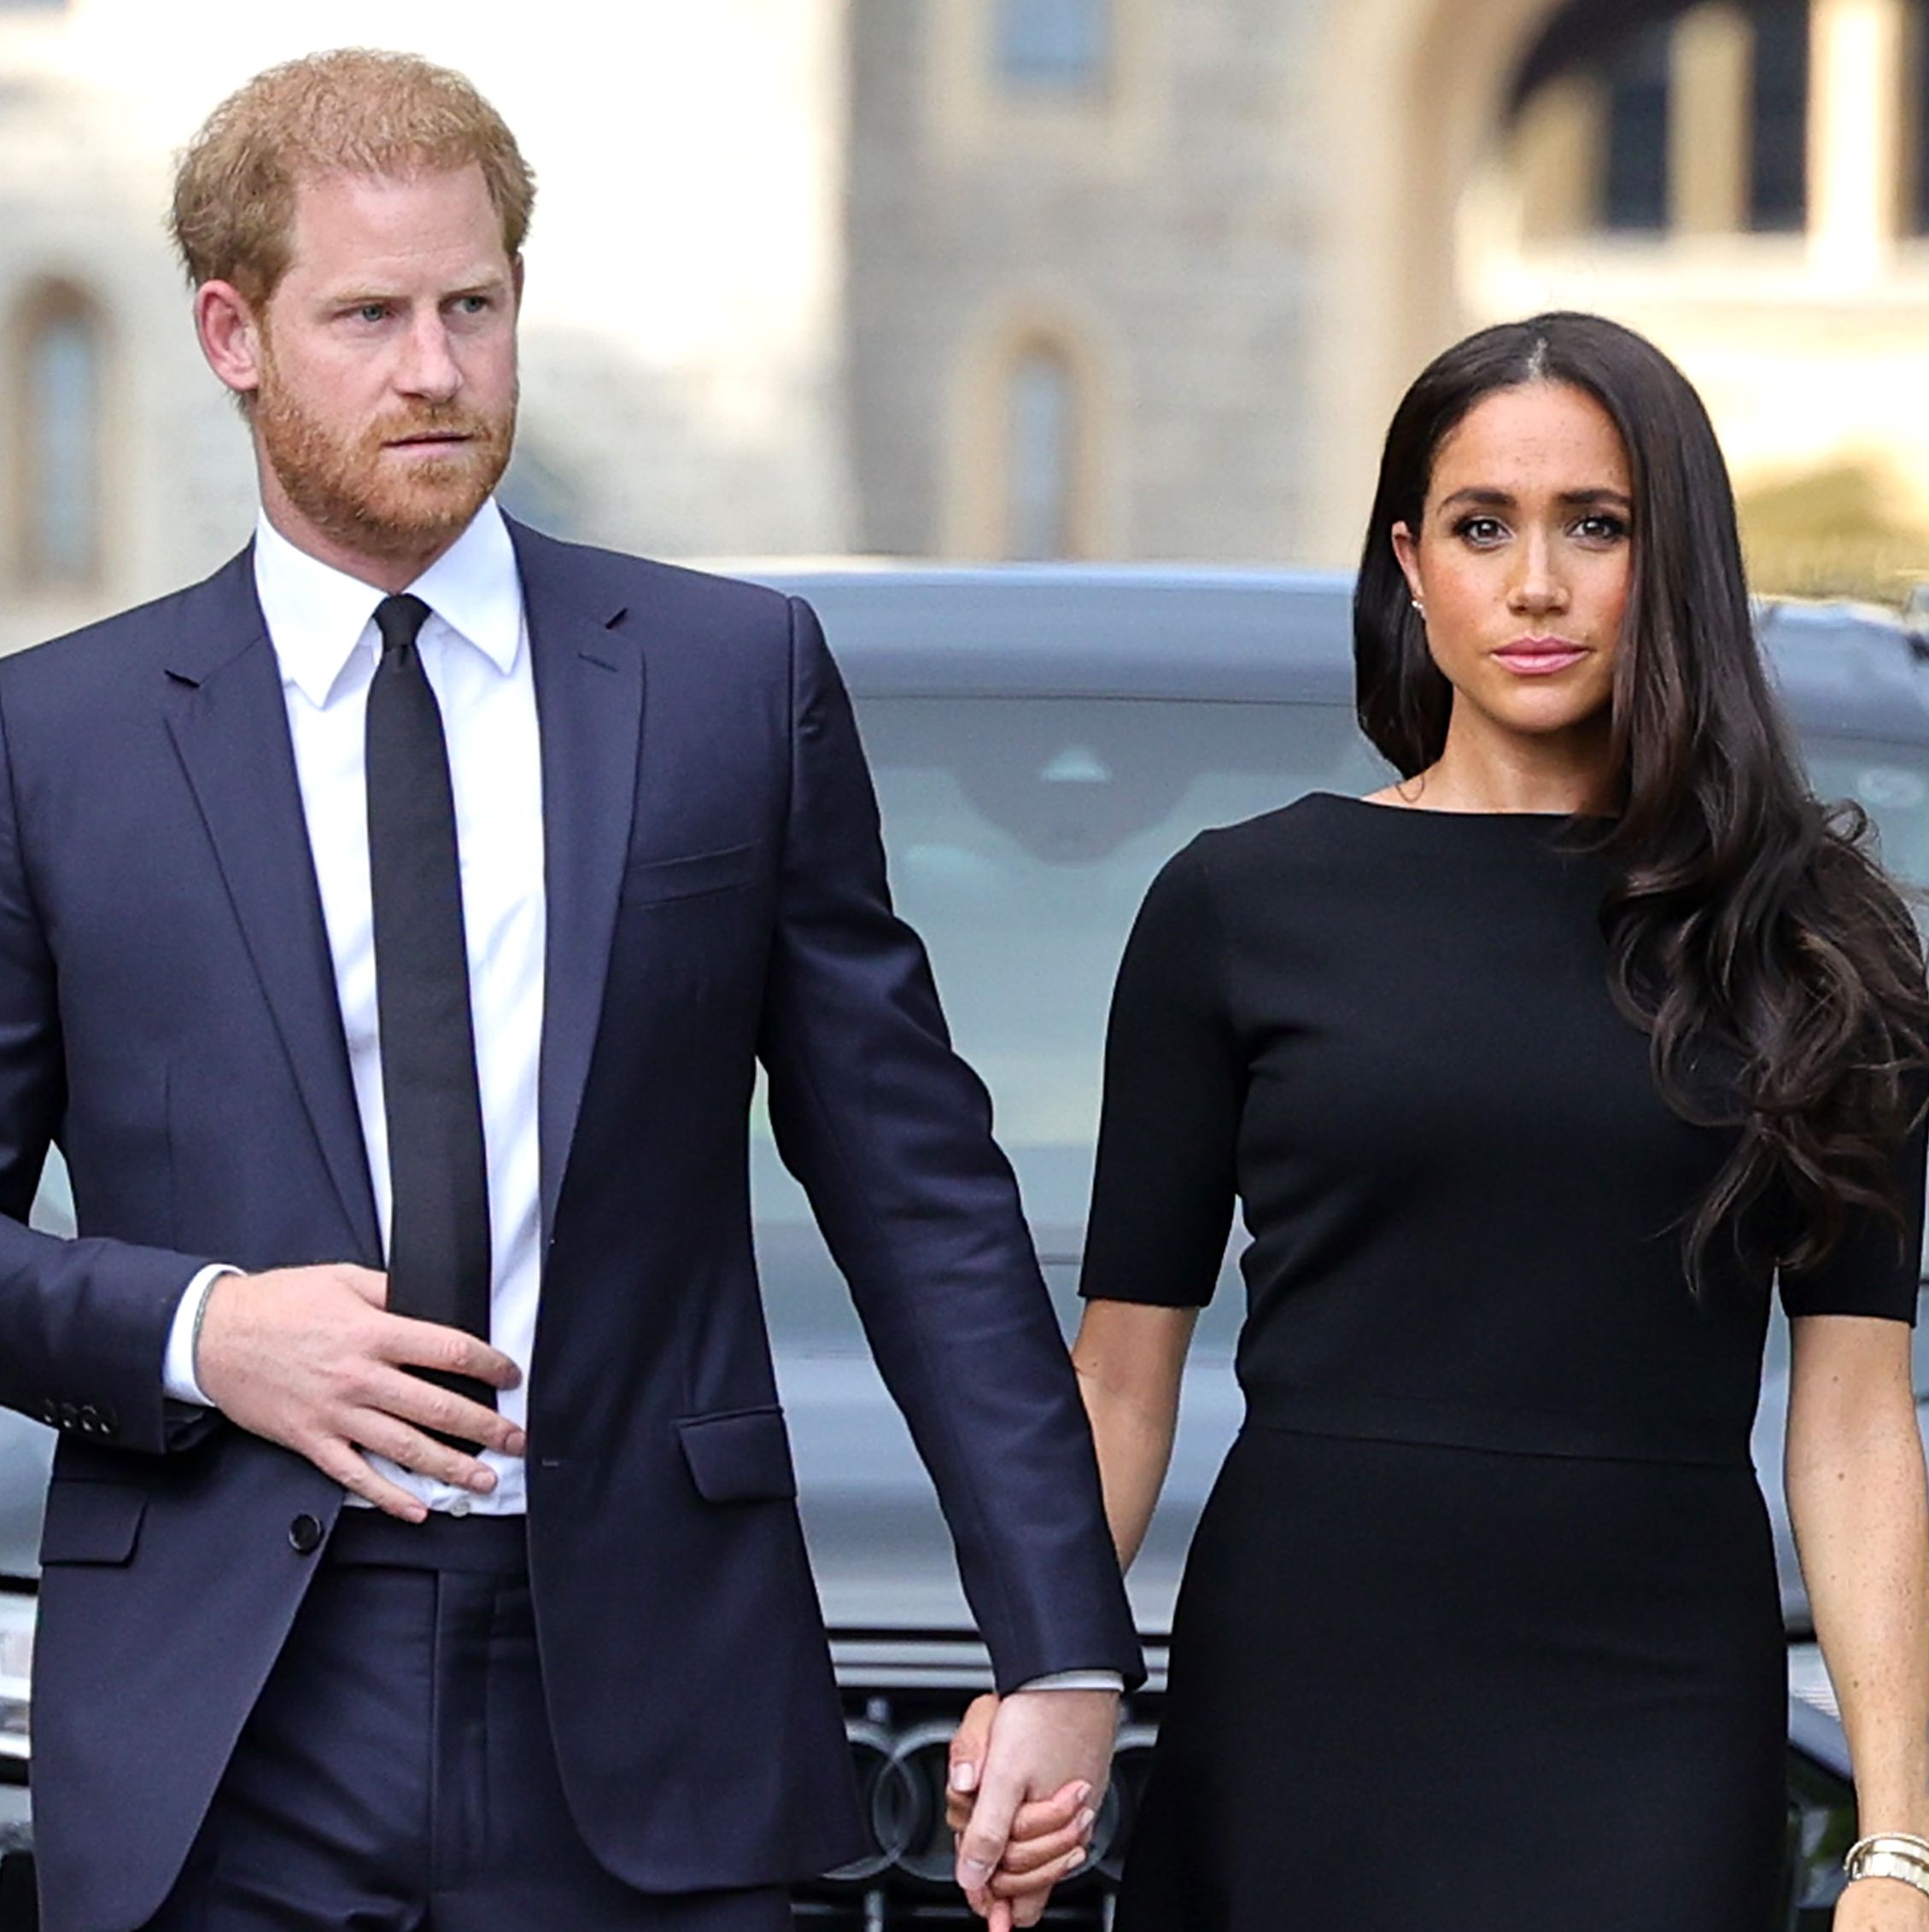 If Harry and Meghan Skip the Coronation, It Could *Actually* Kill Their Relationship with the Royal Family